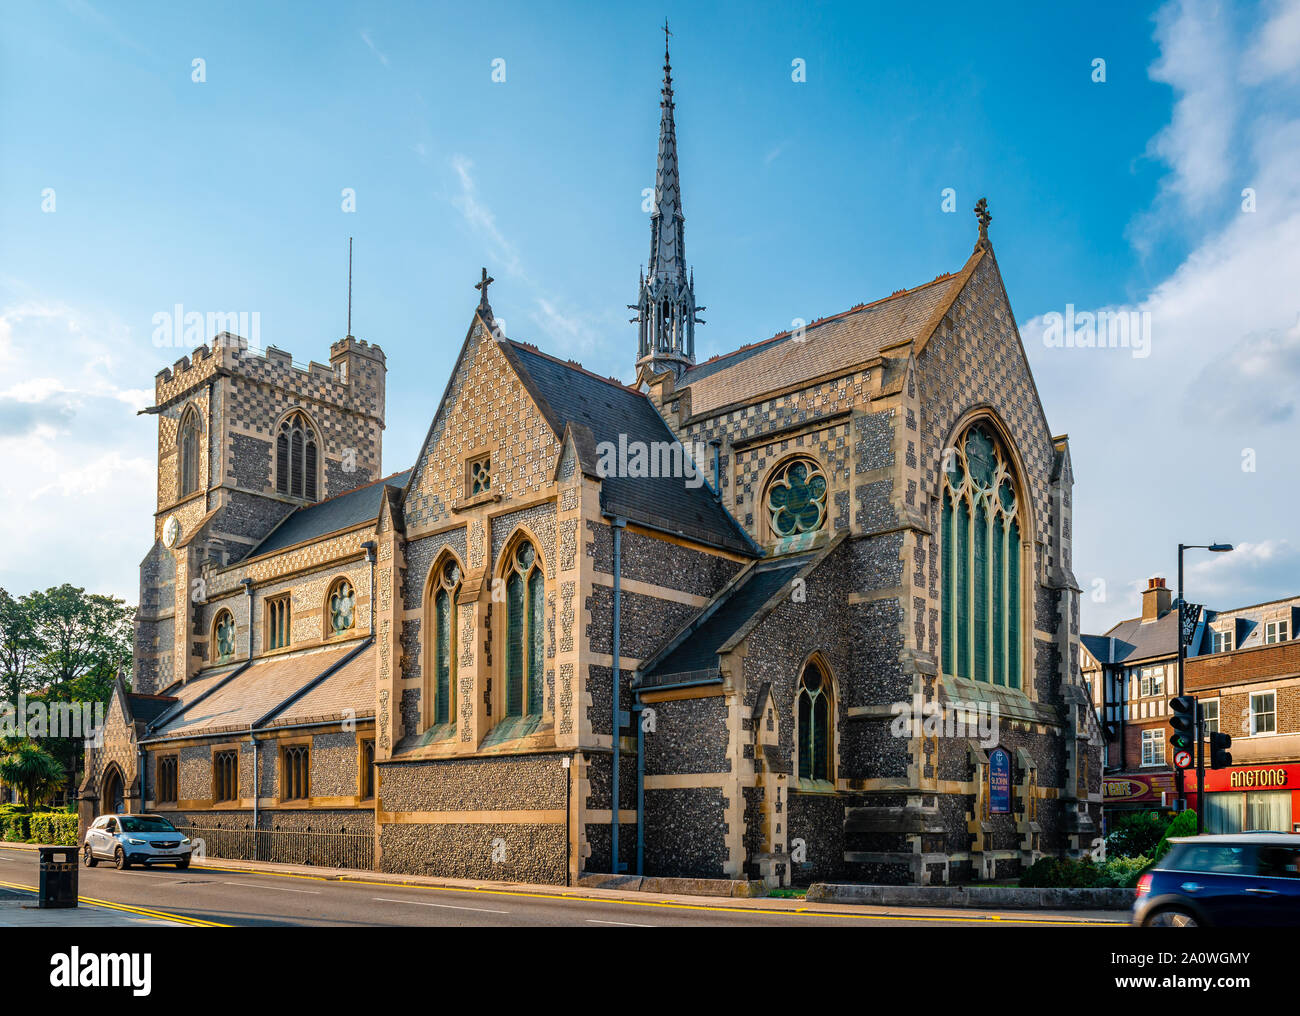 View of St John the Baptist Church, in High Barnet, London. Built around 1250, it stands at the junction of Wood Street and High Street. Stock Photo